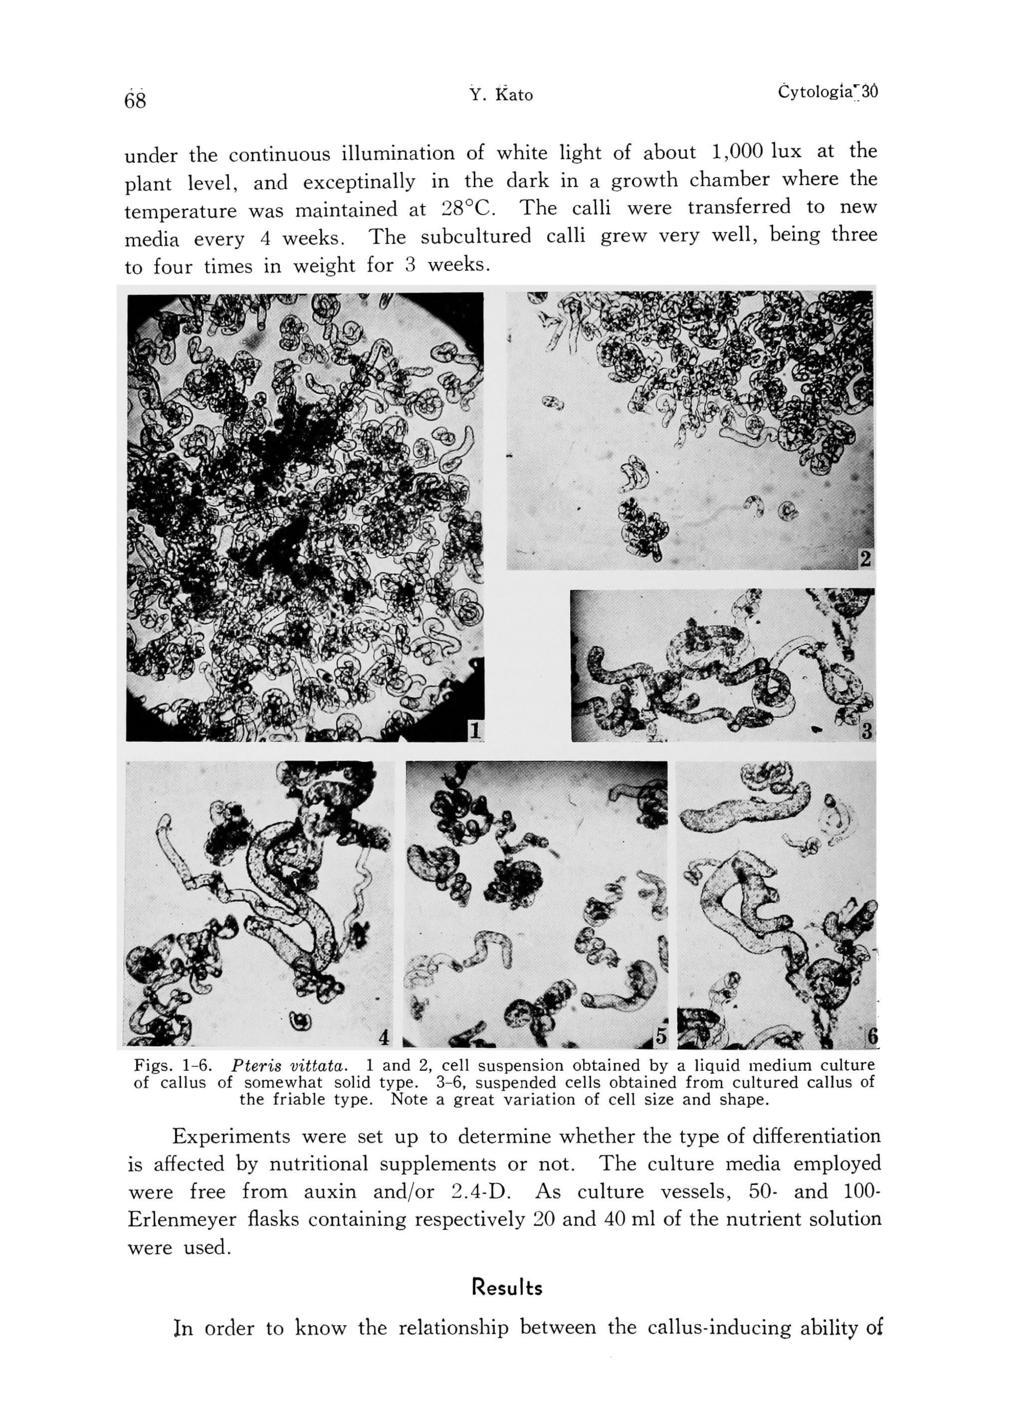 68 Y. kato Cytologia 30 under the continuous illumination of white light of about 1,000 lux at the plant level, and exceptinally in the dark in a growth chamber where the temperature was maintained